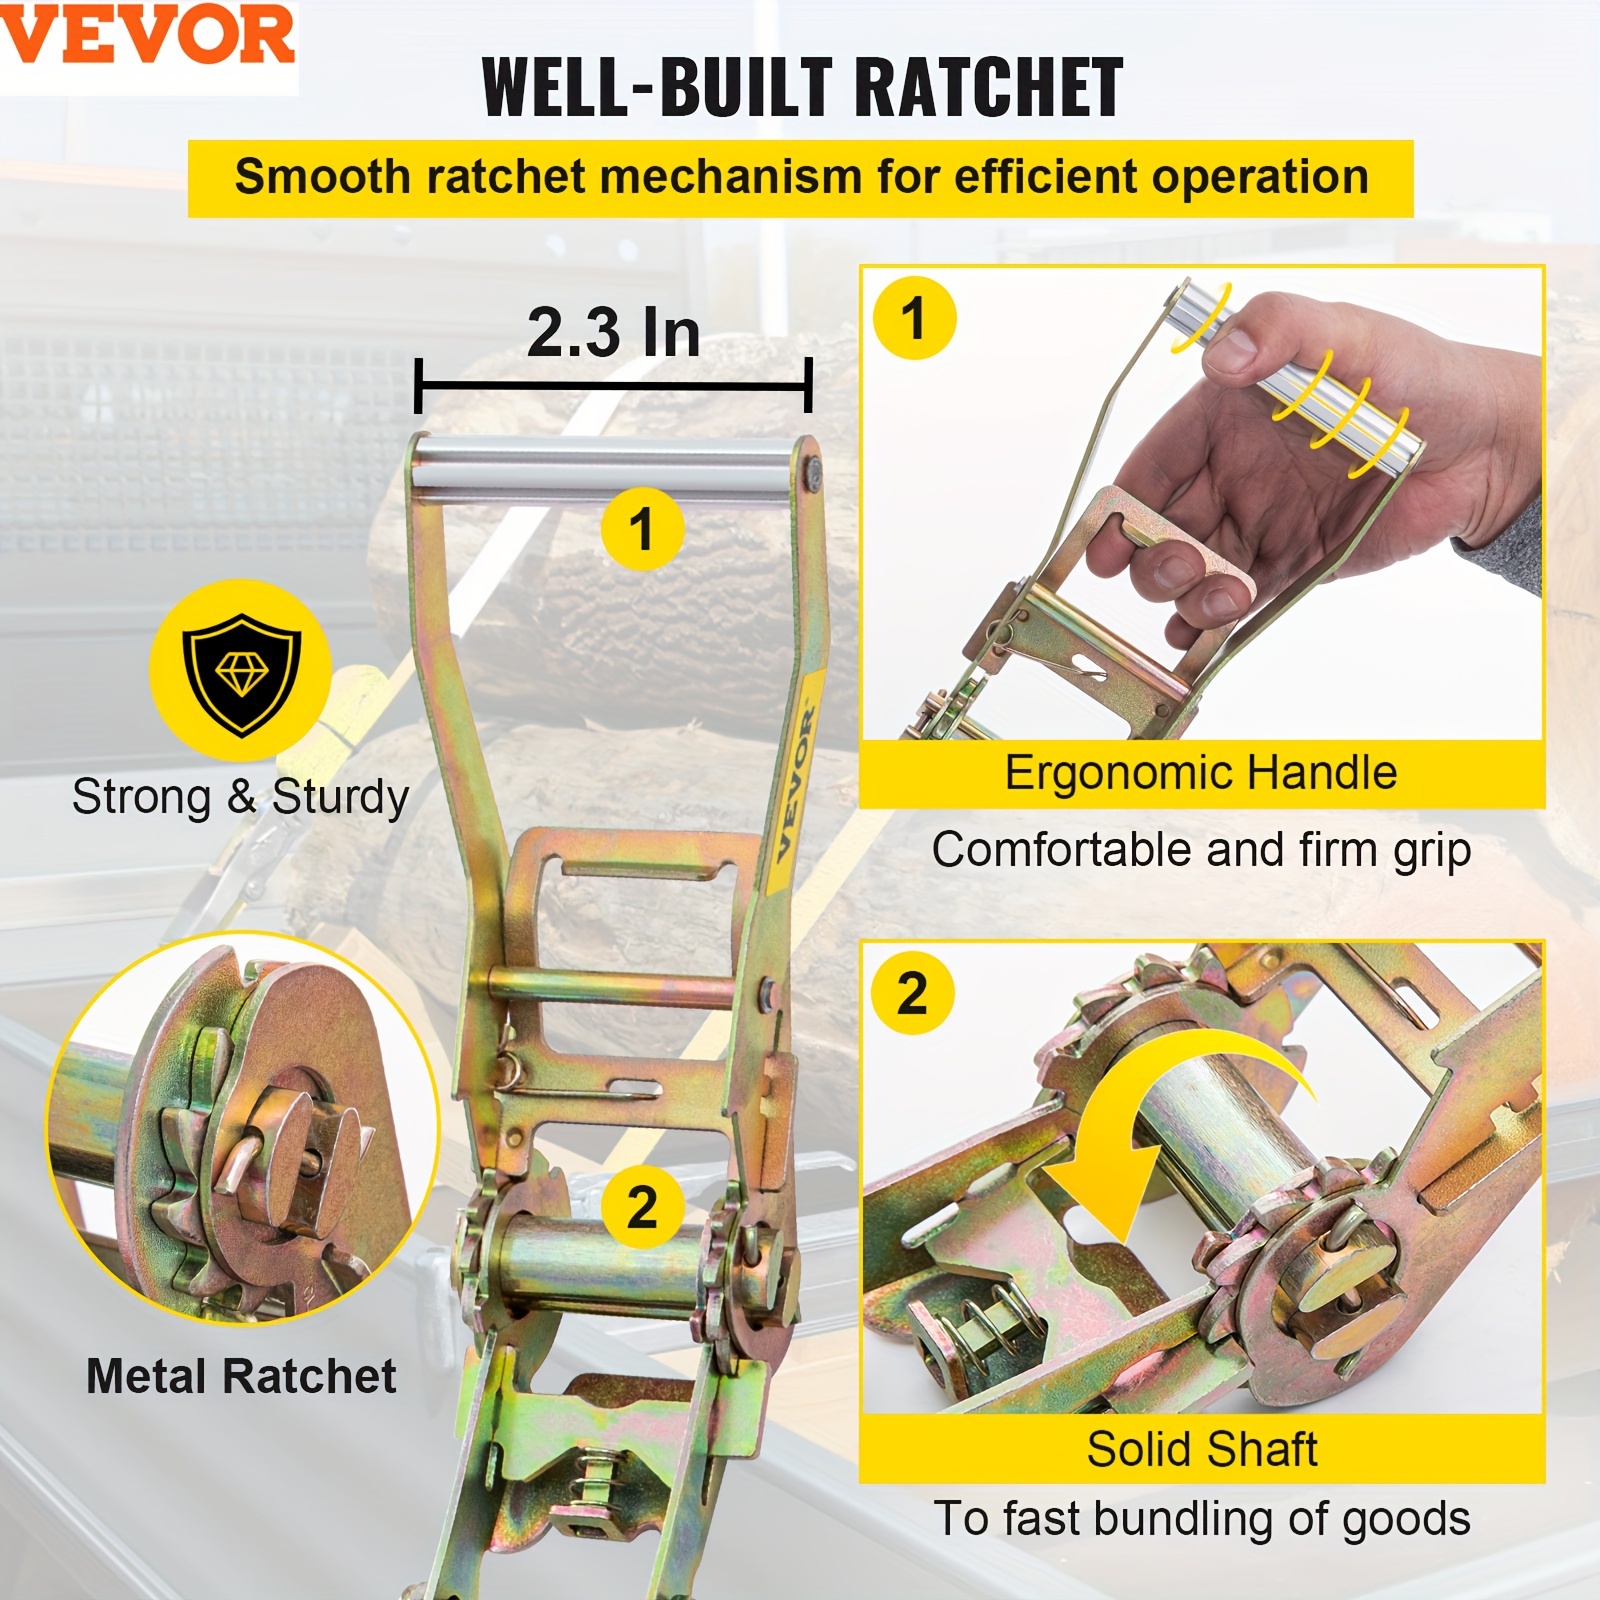 

Vevor Ratchet Tie Down Strap, 15.6ft X 2in Polyester Ratchet Strap 4000 Lbs Working Load, 12 Pcs Heavy Duty Car Straps W/ Double Hooks, Car Tie Down Strap W/ Chain Anchors, Security Fastening, Yellow